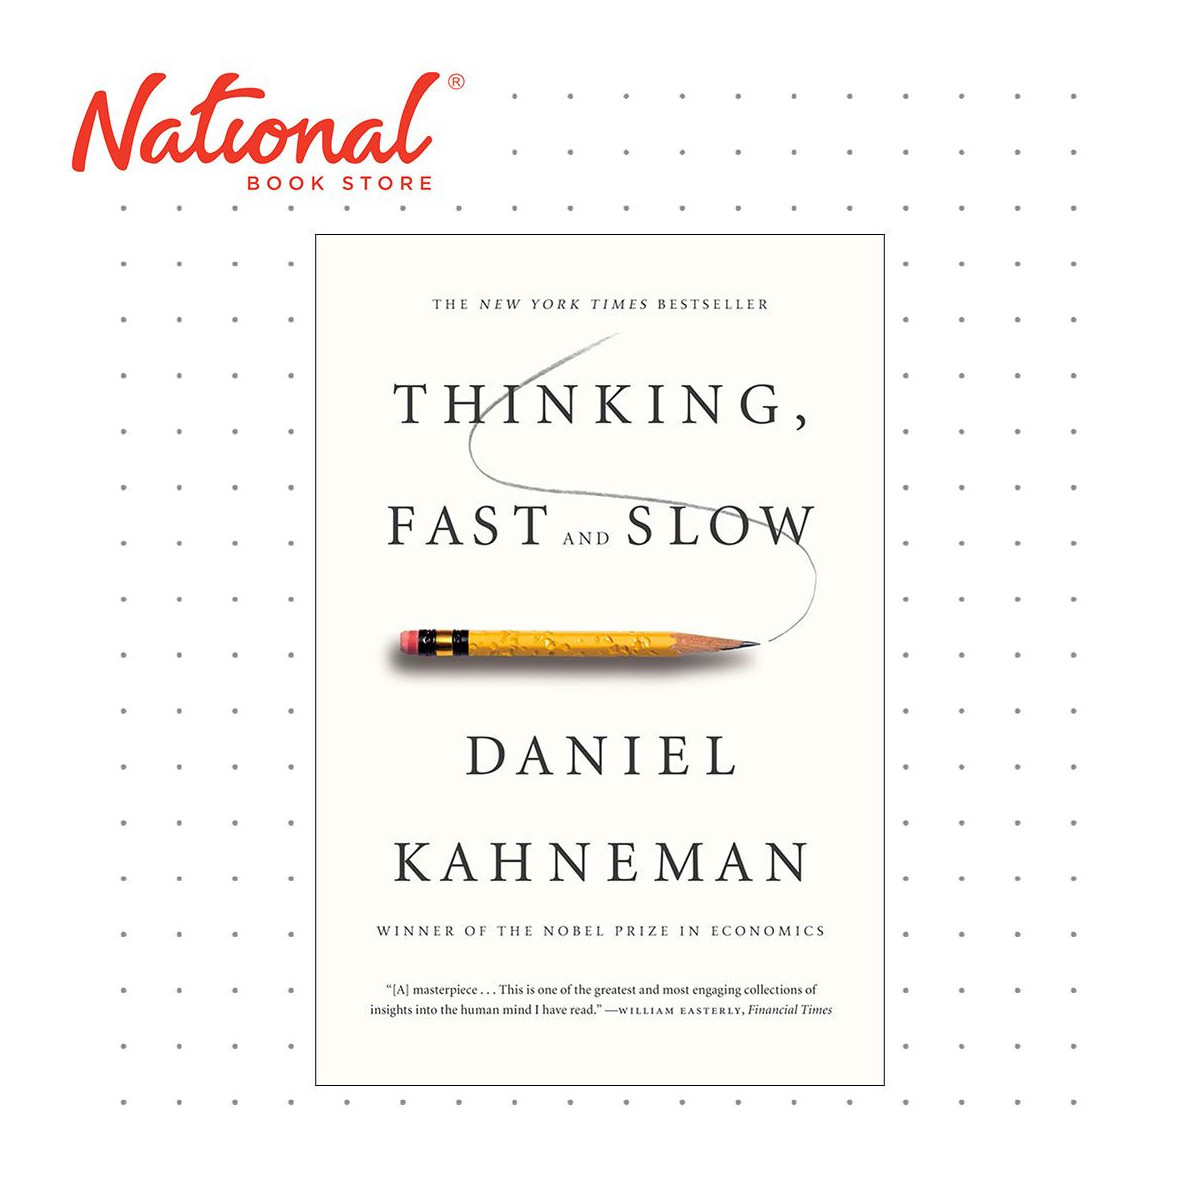 PAPERBACK　AND　BOOKS　TRADE　BUSINESS　SLOW　BY　DANIEL　KAHNEMAN　THINKING　FAST